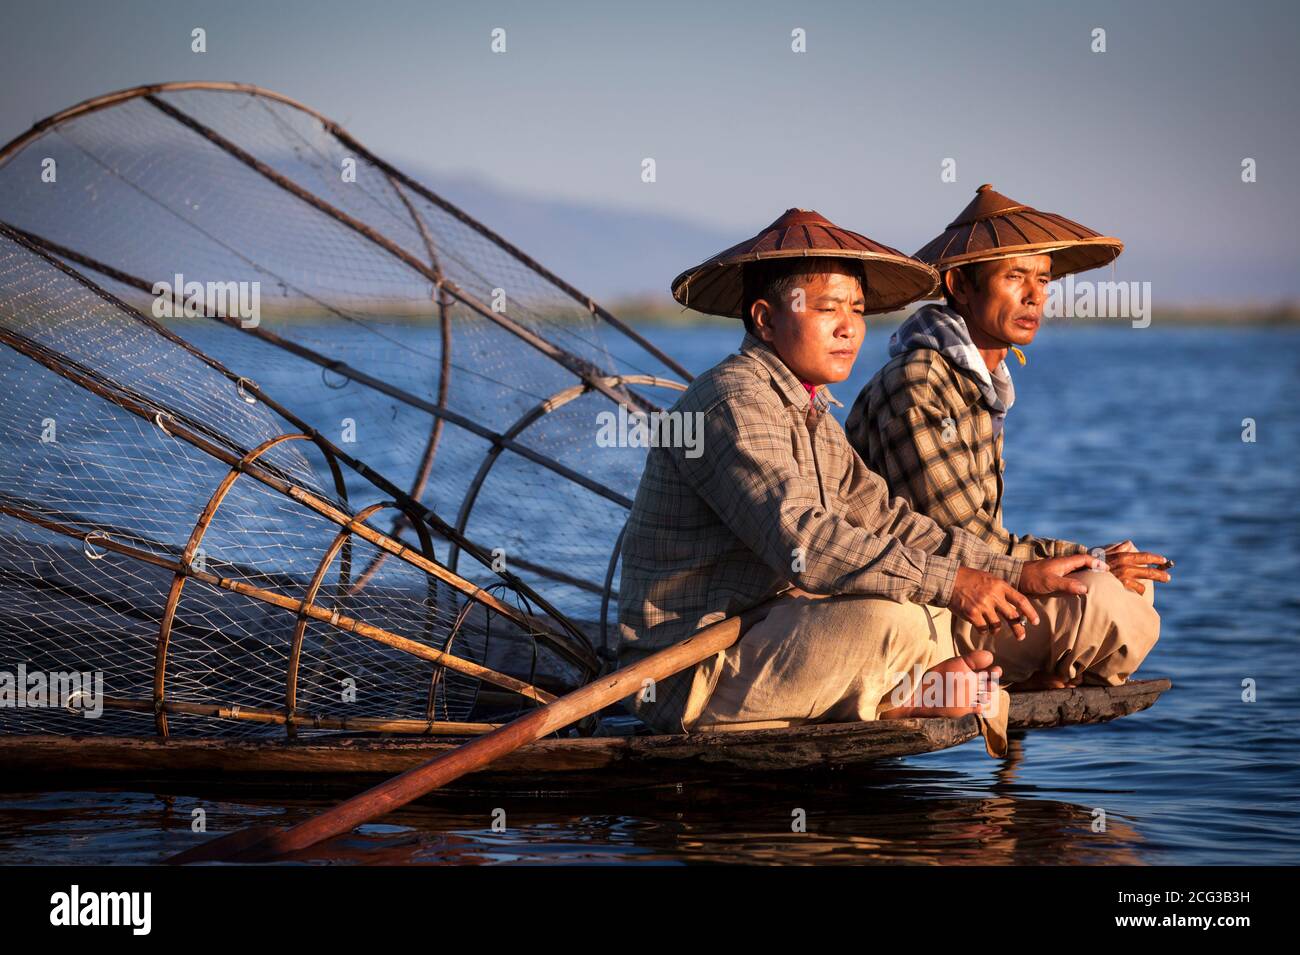 Lake, Inle, Myanmar, 17th November 2014: lake Inle fishermen smoking on thier boat in early ours of a day during surise Stock Photo